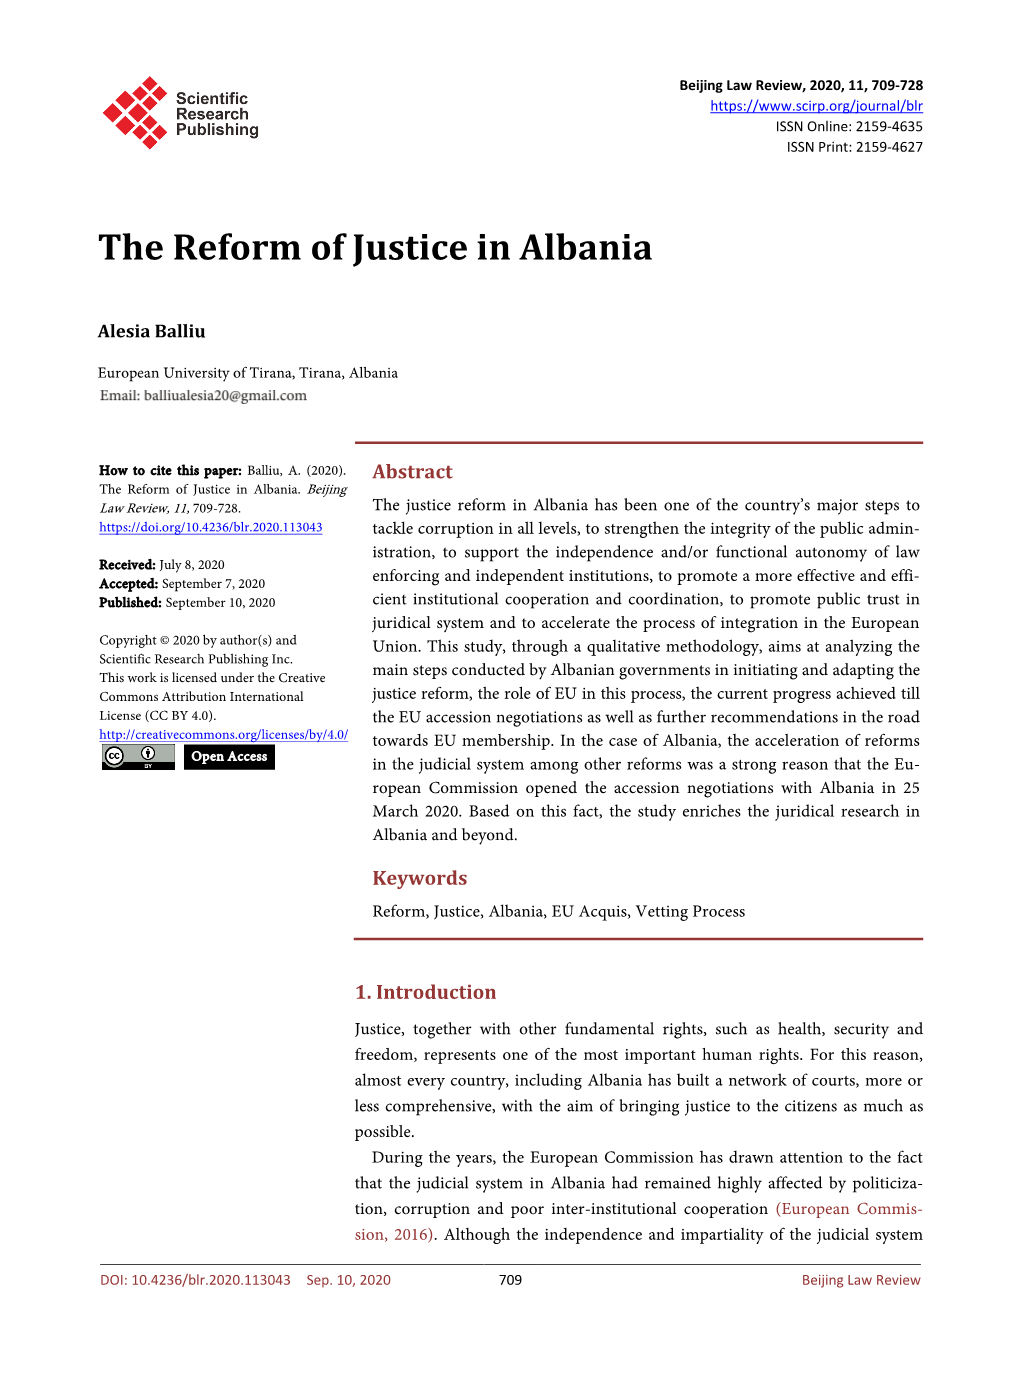 The Reform of Justice in Albania